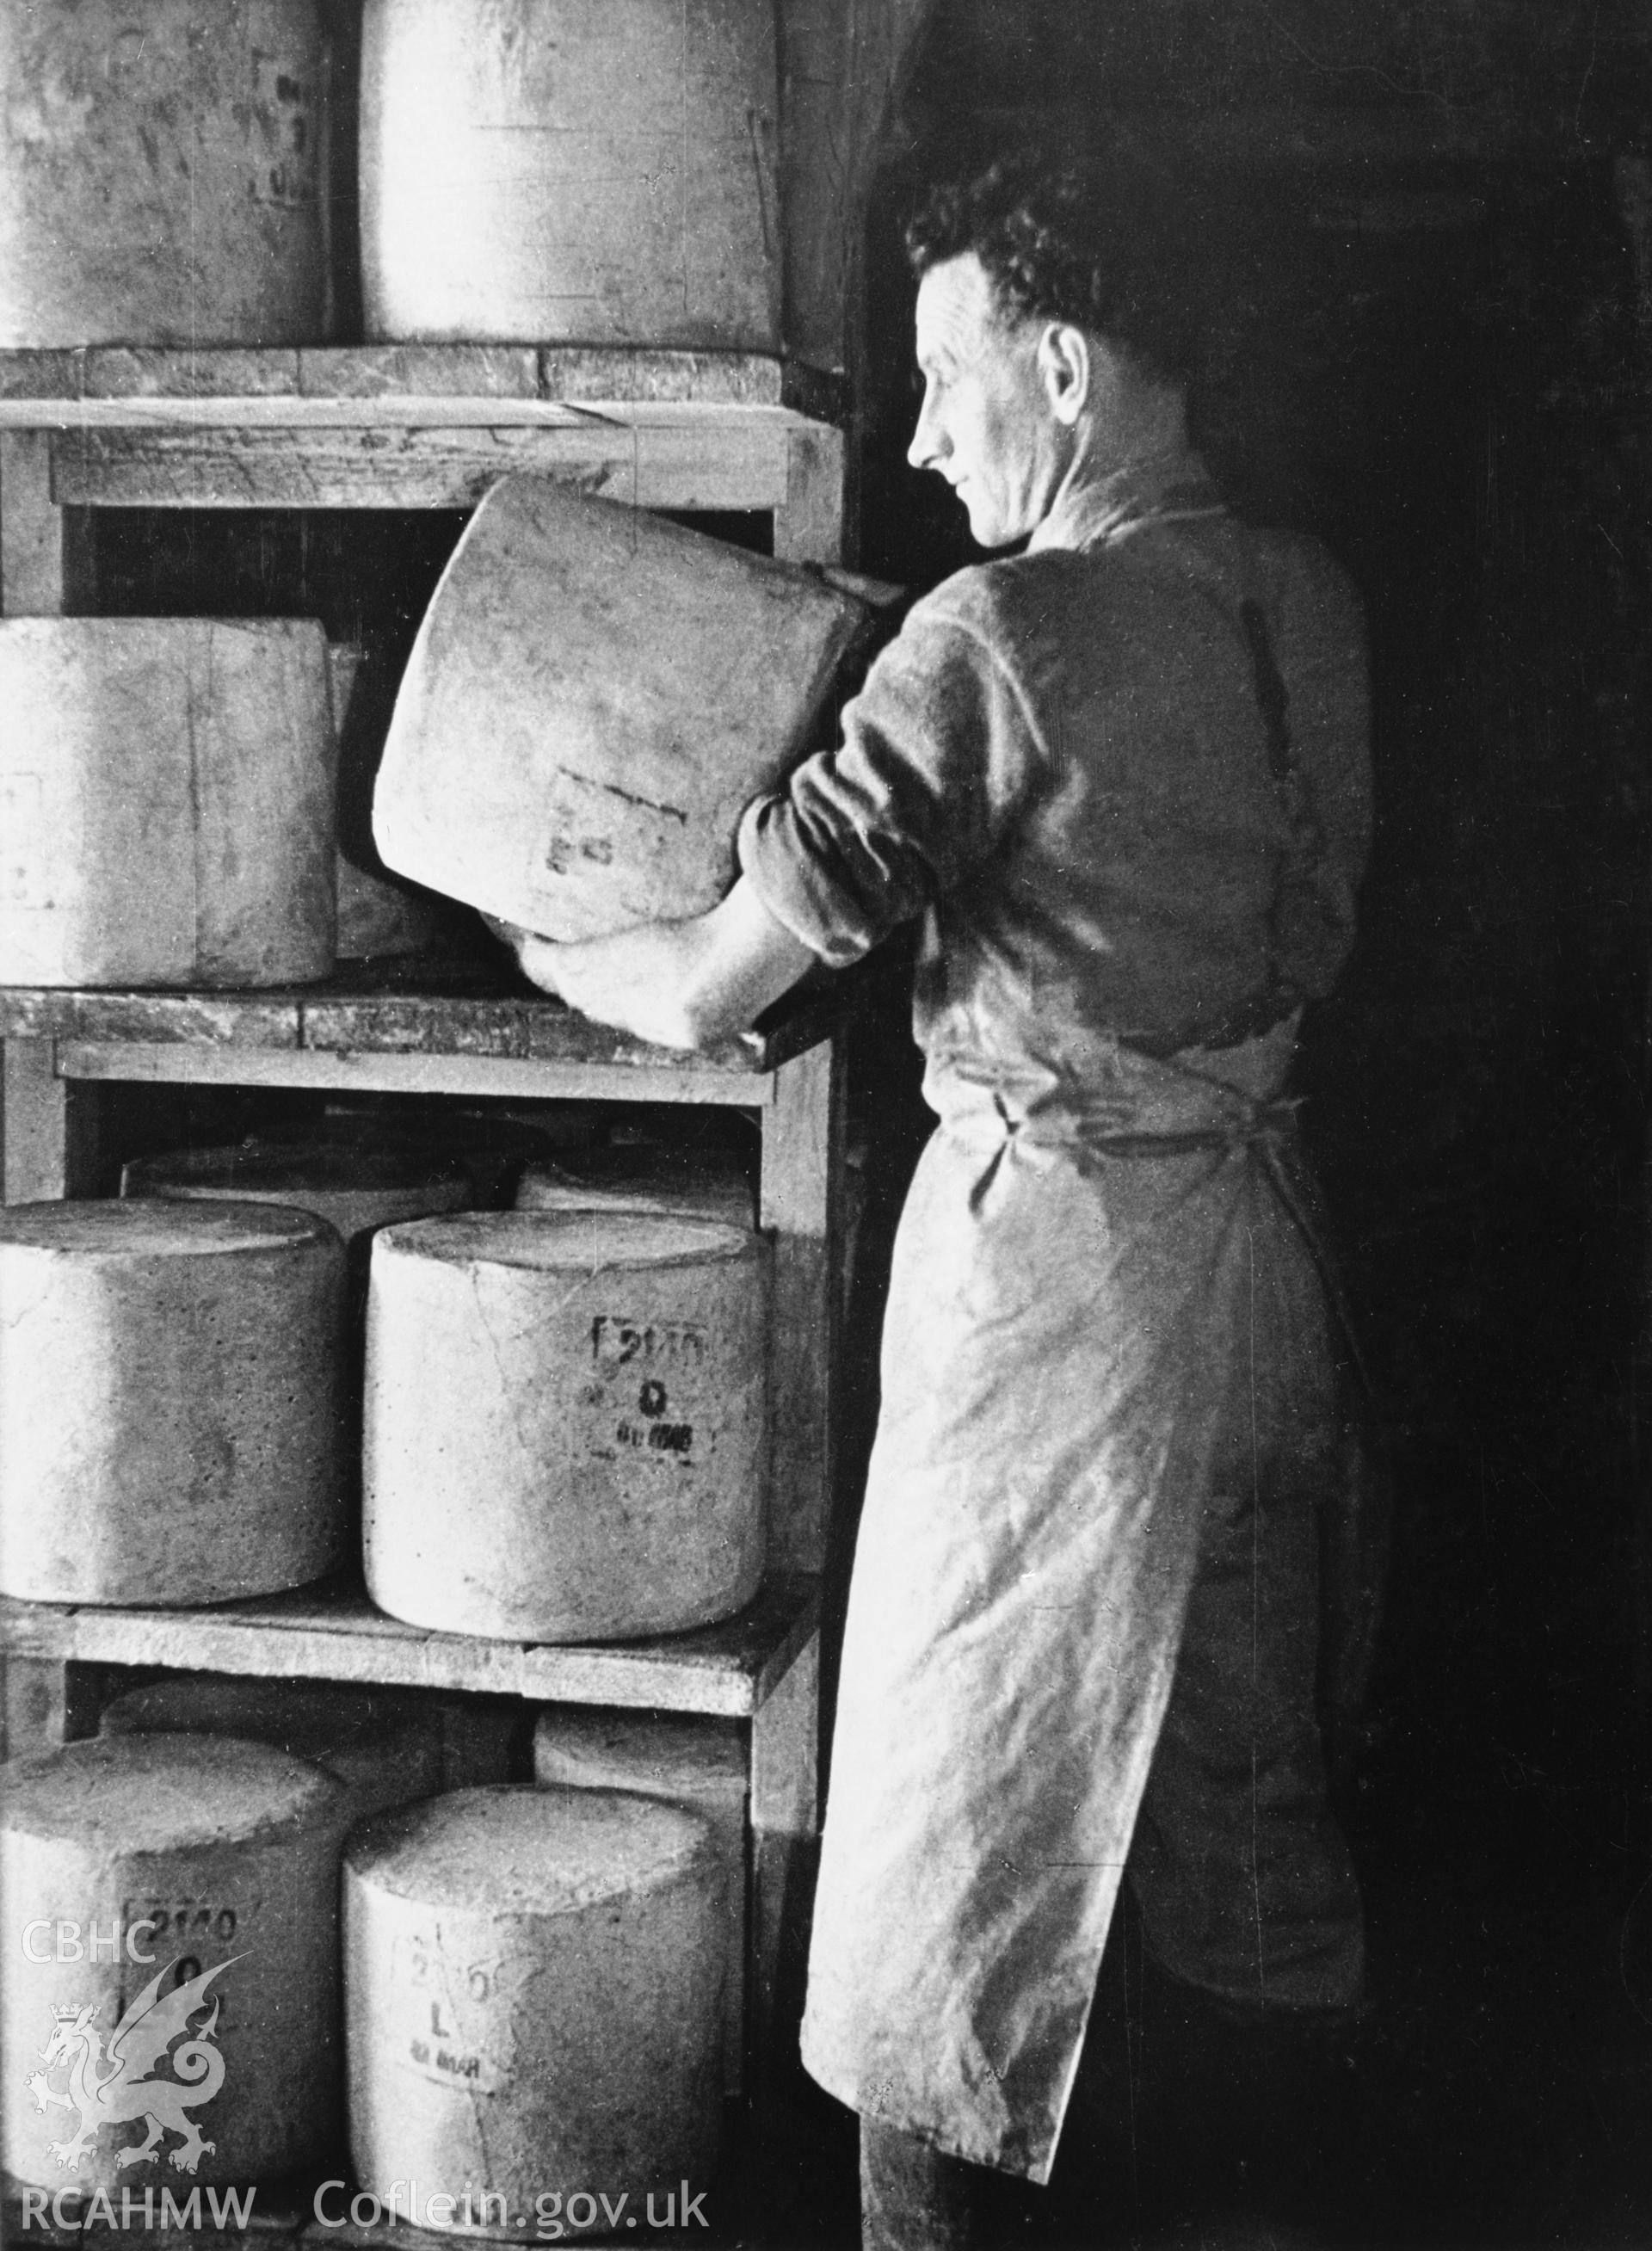 Copy of a pre-1950 photo showing turning of the cheeses